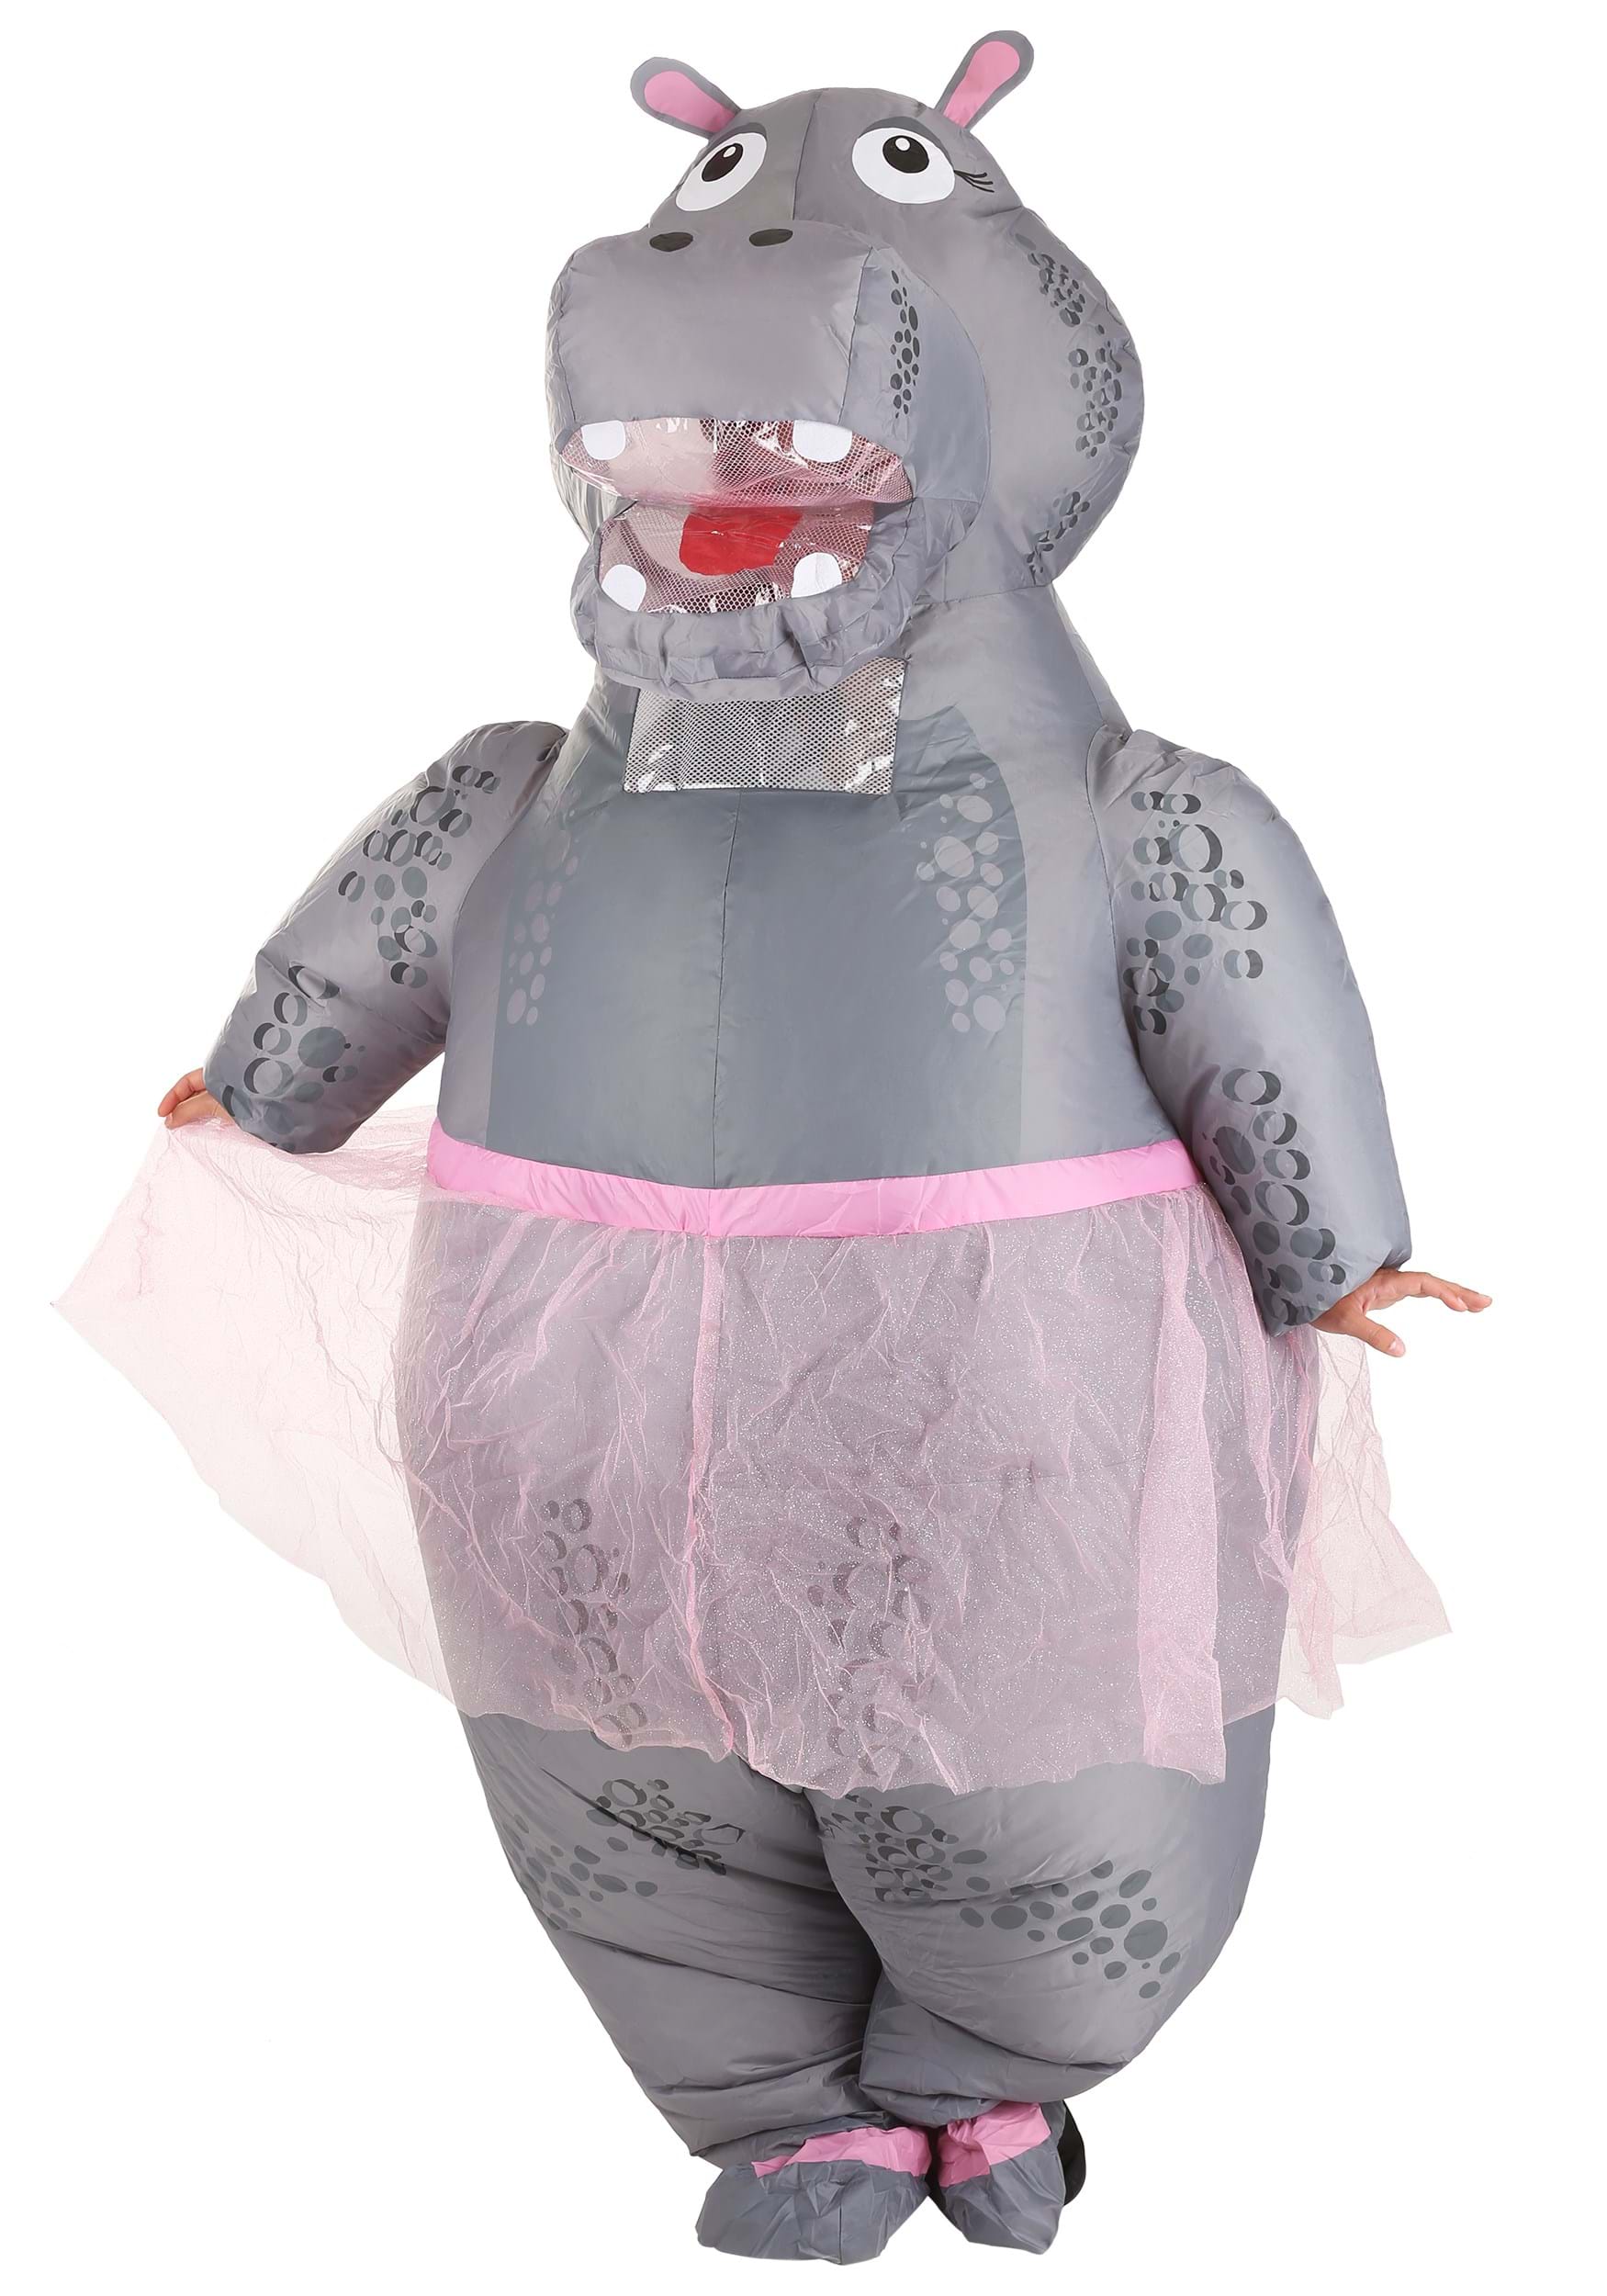 Adult Inflatable Hippo Costume